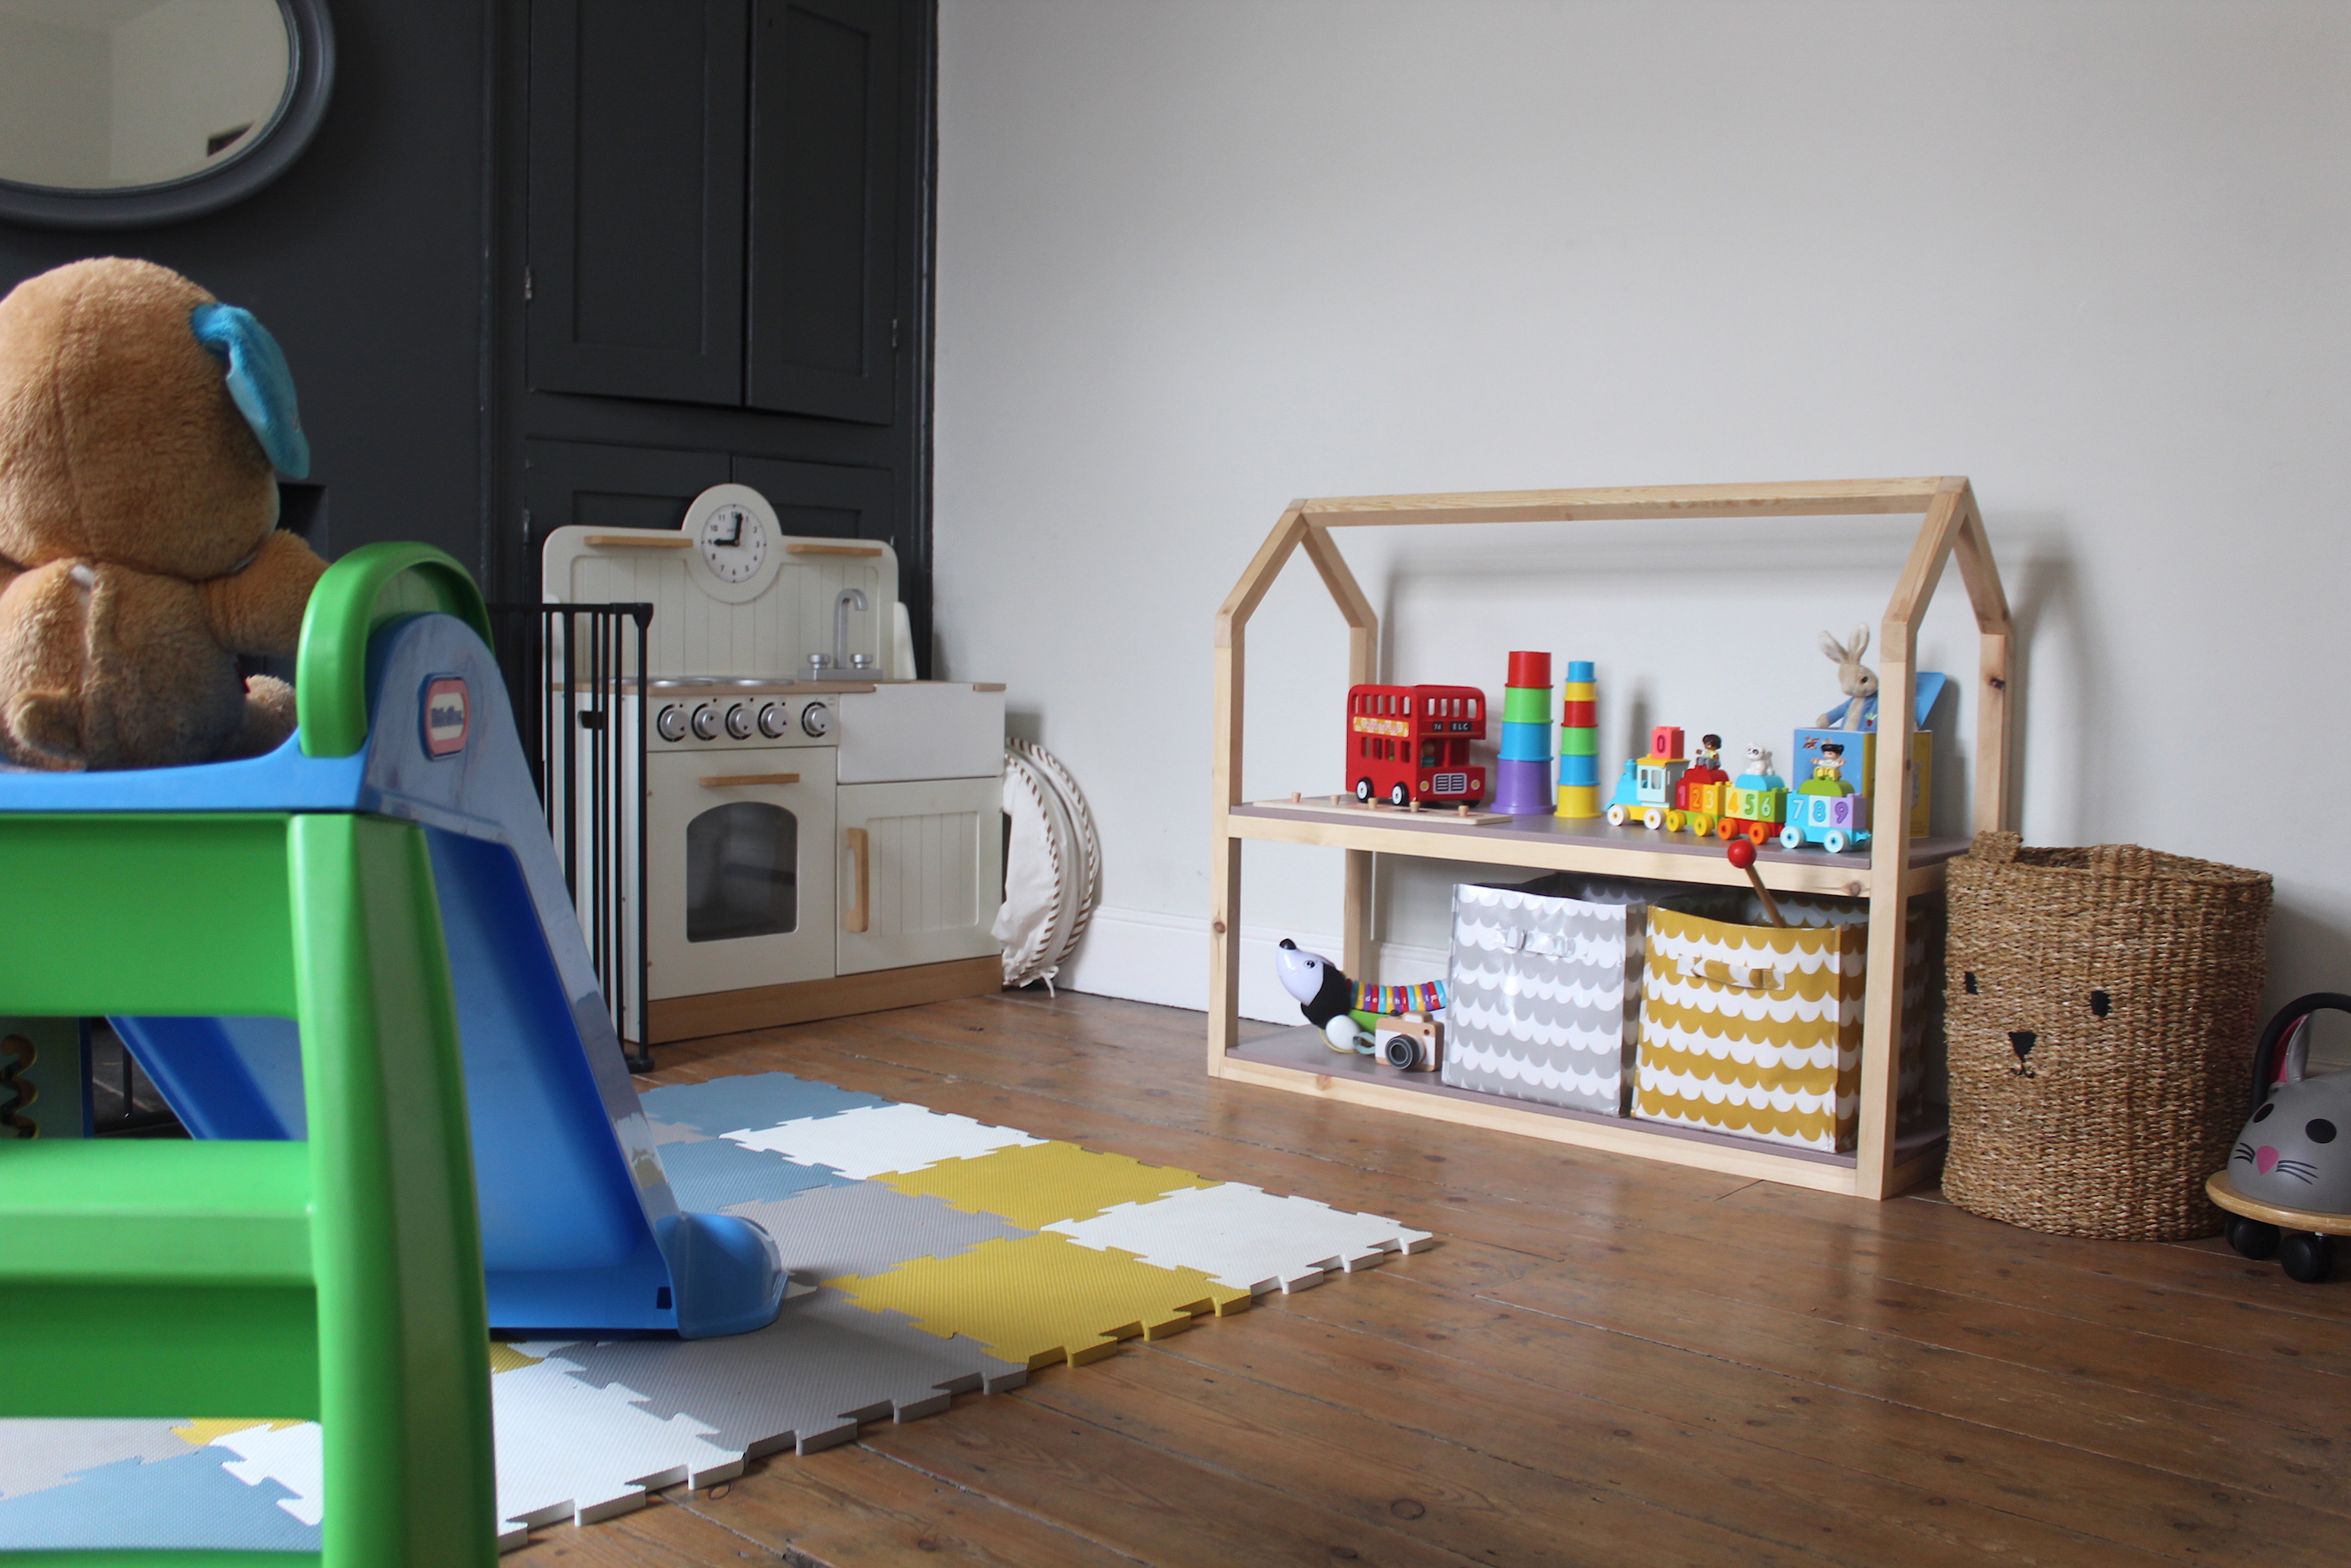 How to build your own toy storage in the shape of a house